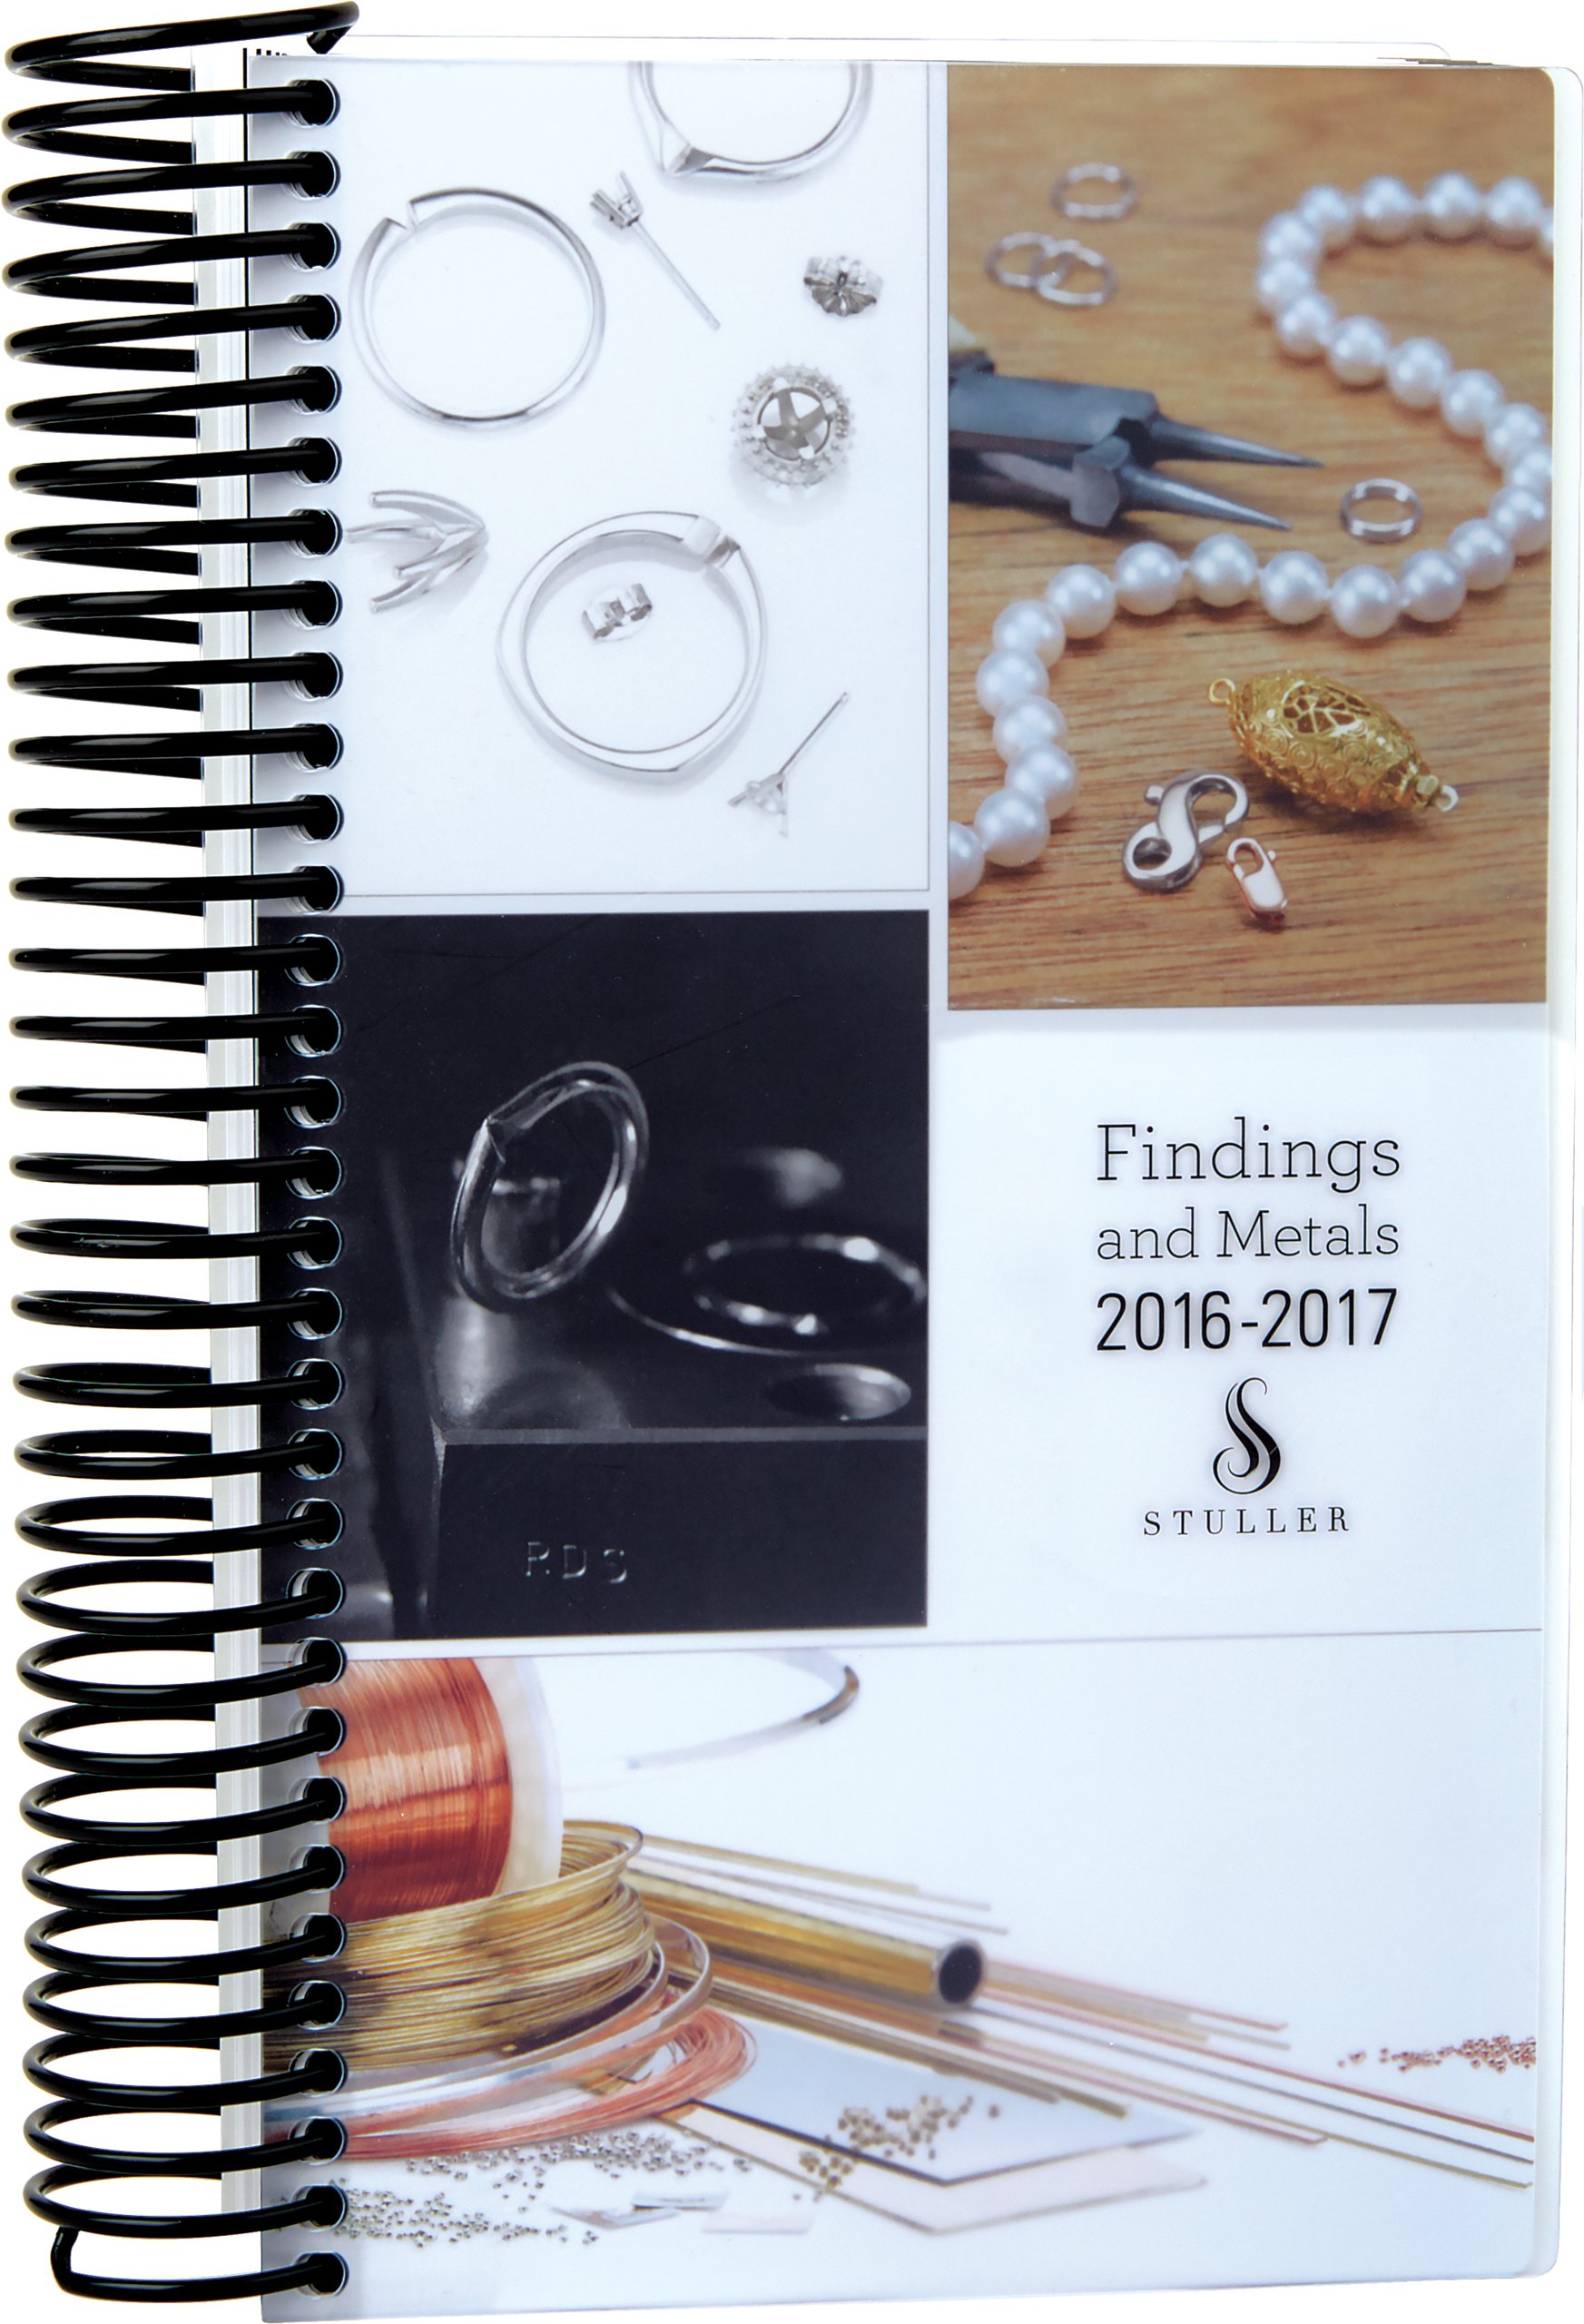 Findings and Metals 2016-2017 Catalog